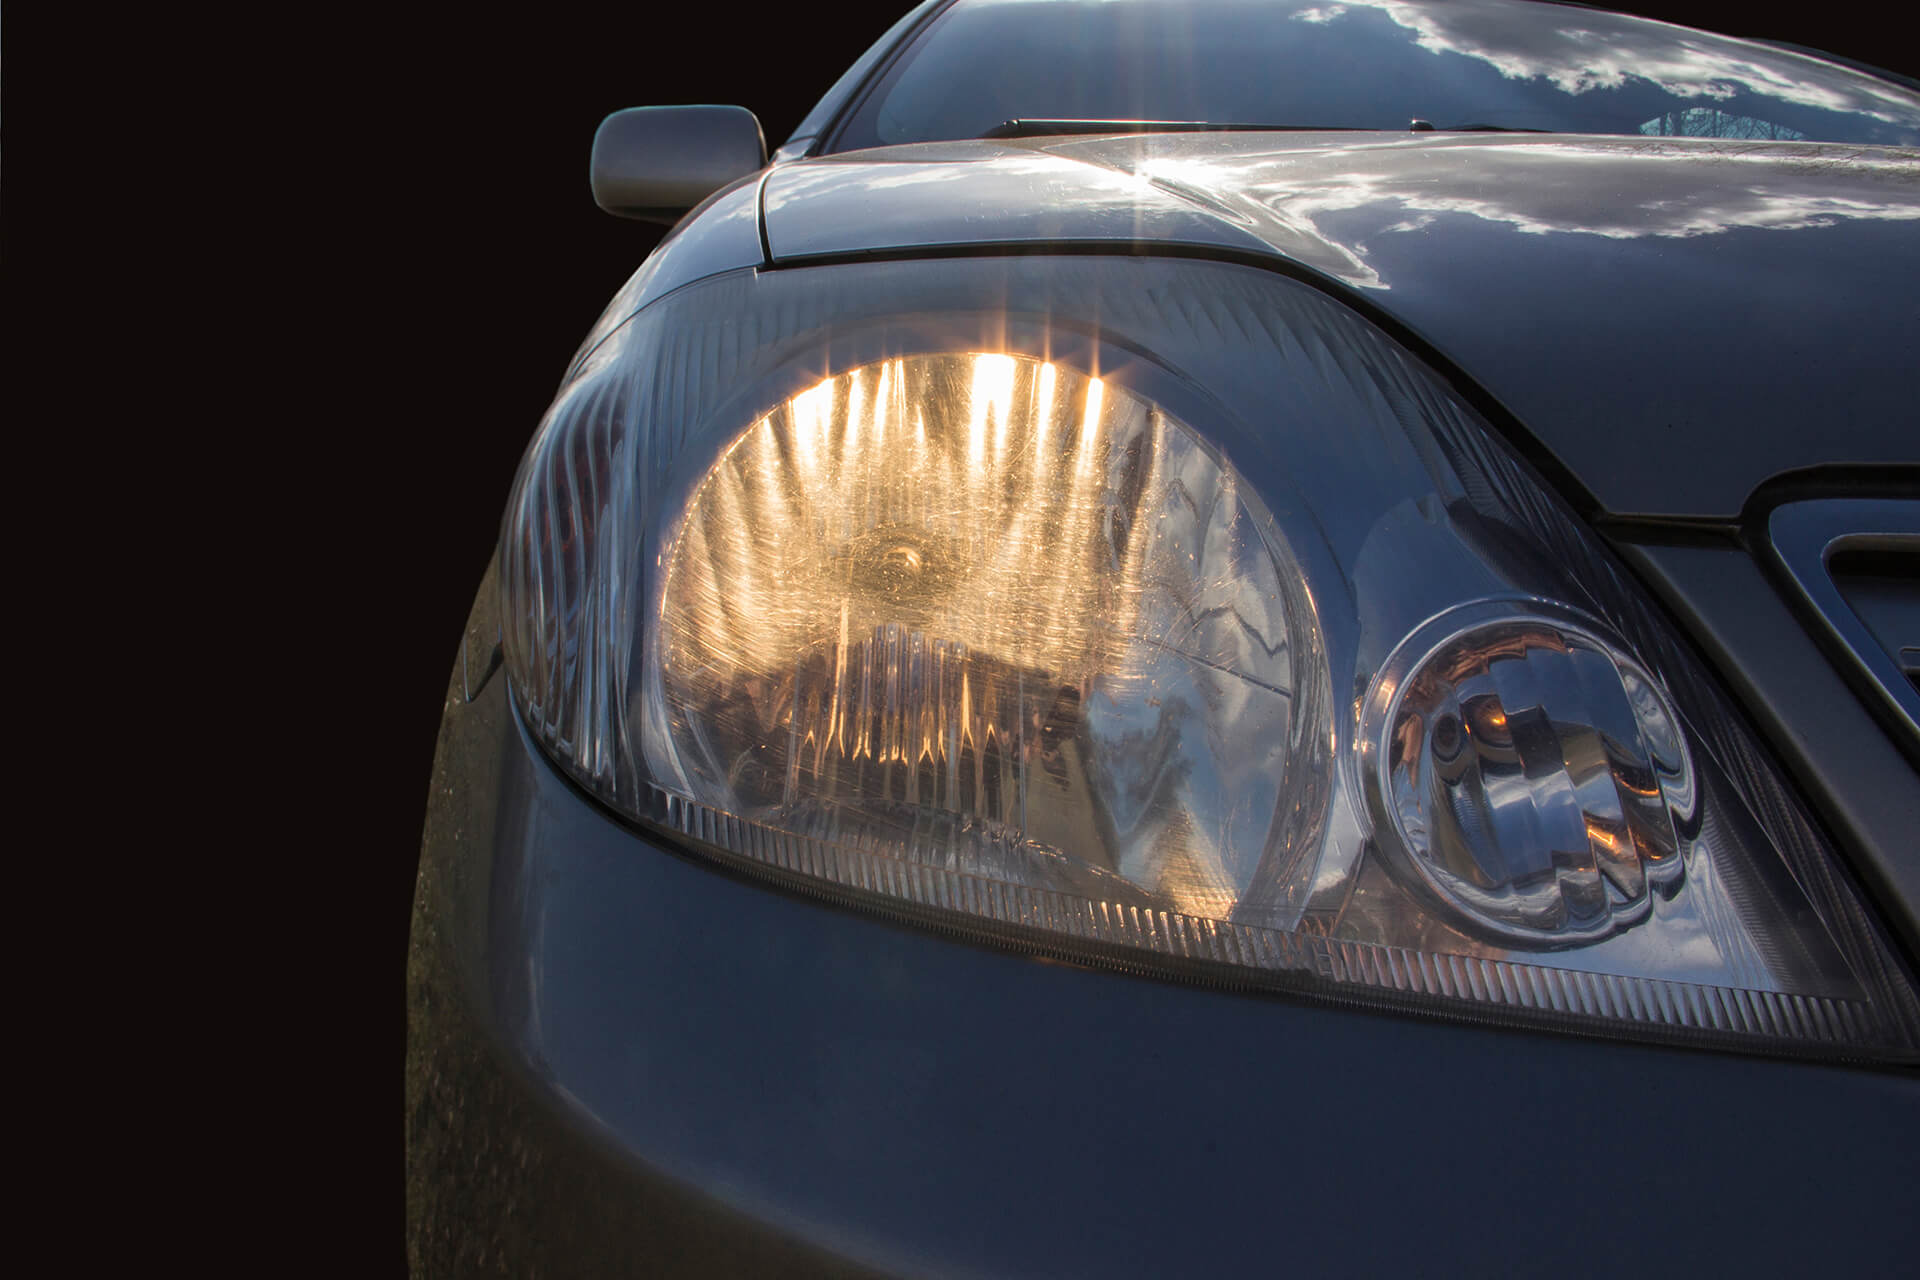 Making headlights brighter: this really helps